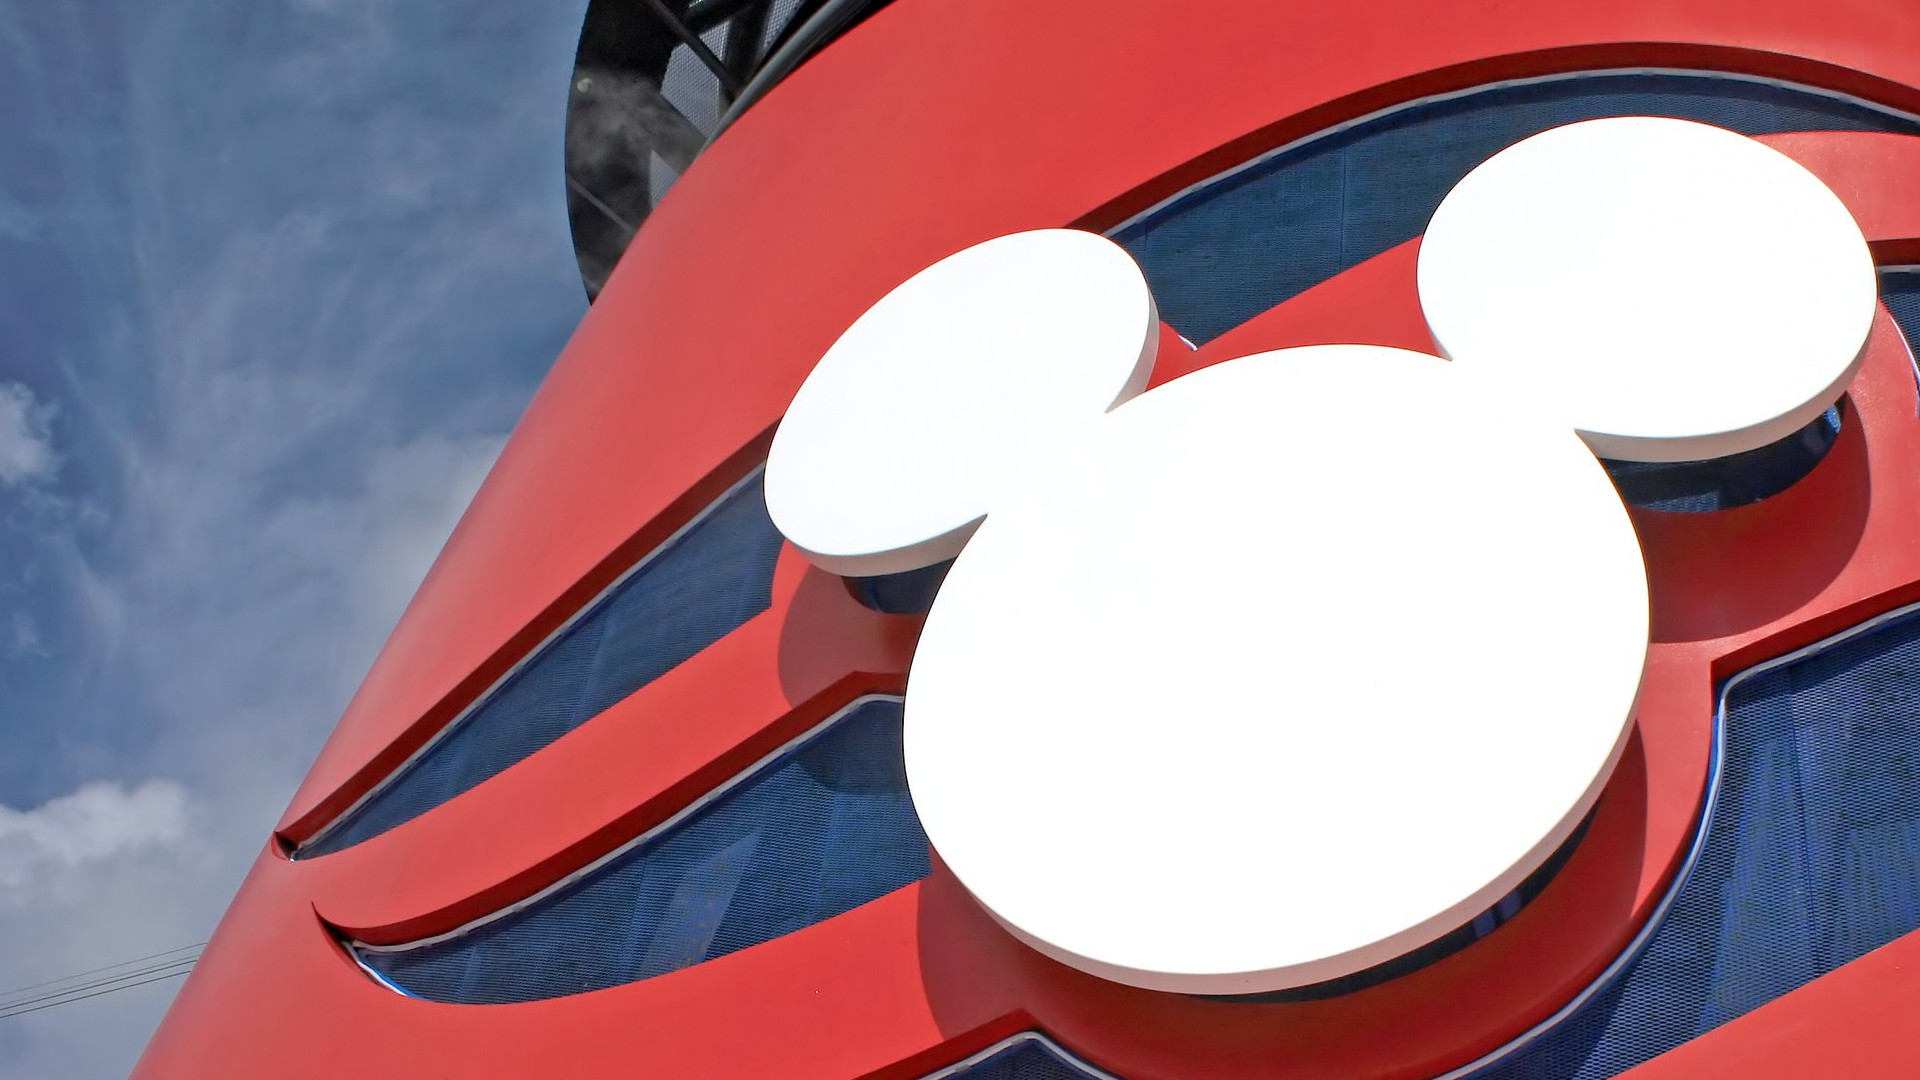 Disney Invests in Online Video Strategy with $500M Acquisition of Maker Studios